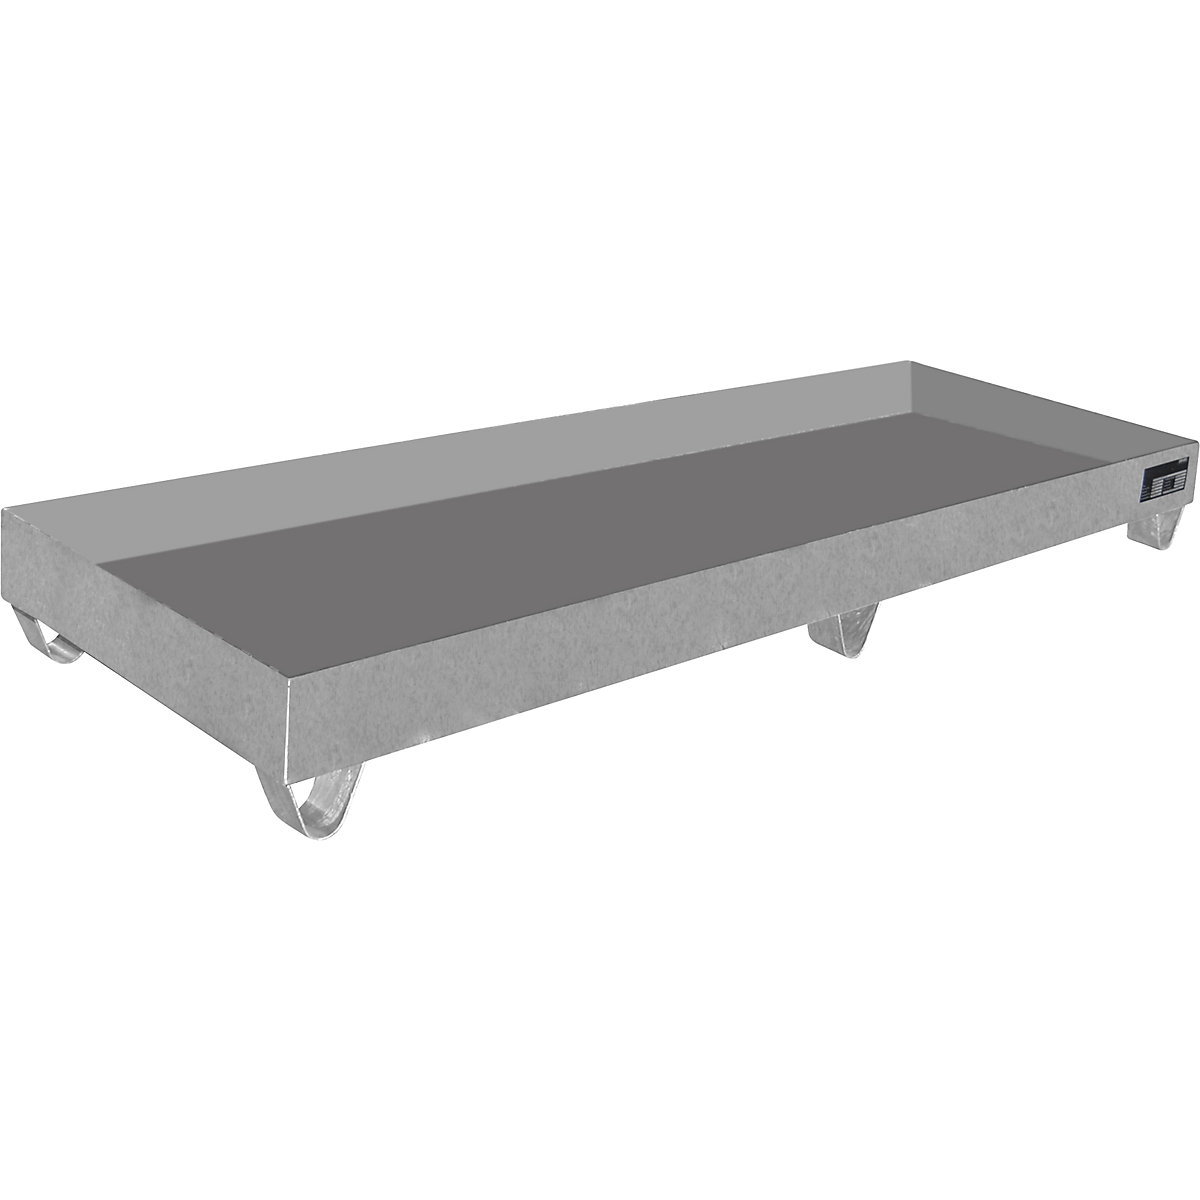 Stainless steel sump tray – eurokraft pro, for 200 l drums, 4 drums, LxWxH 2400 x 800 x 250 mm-2